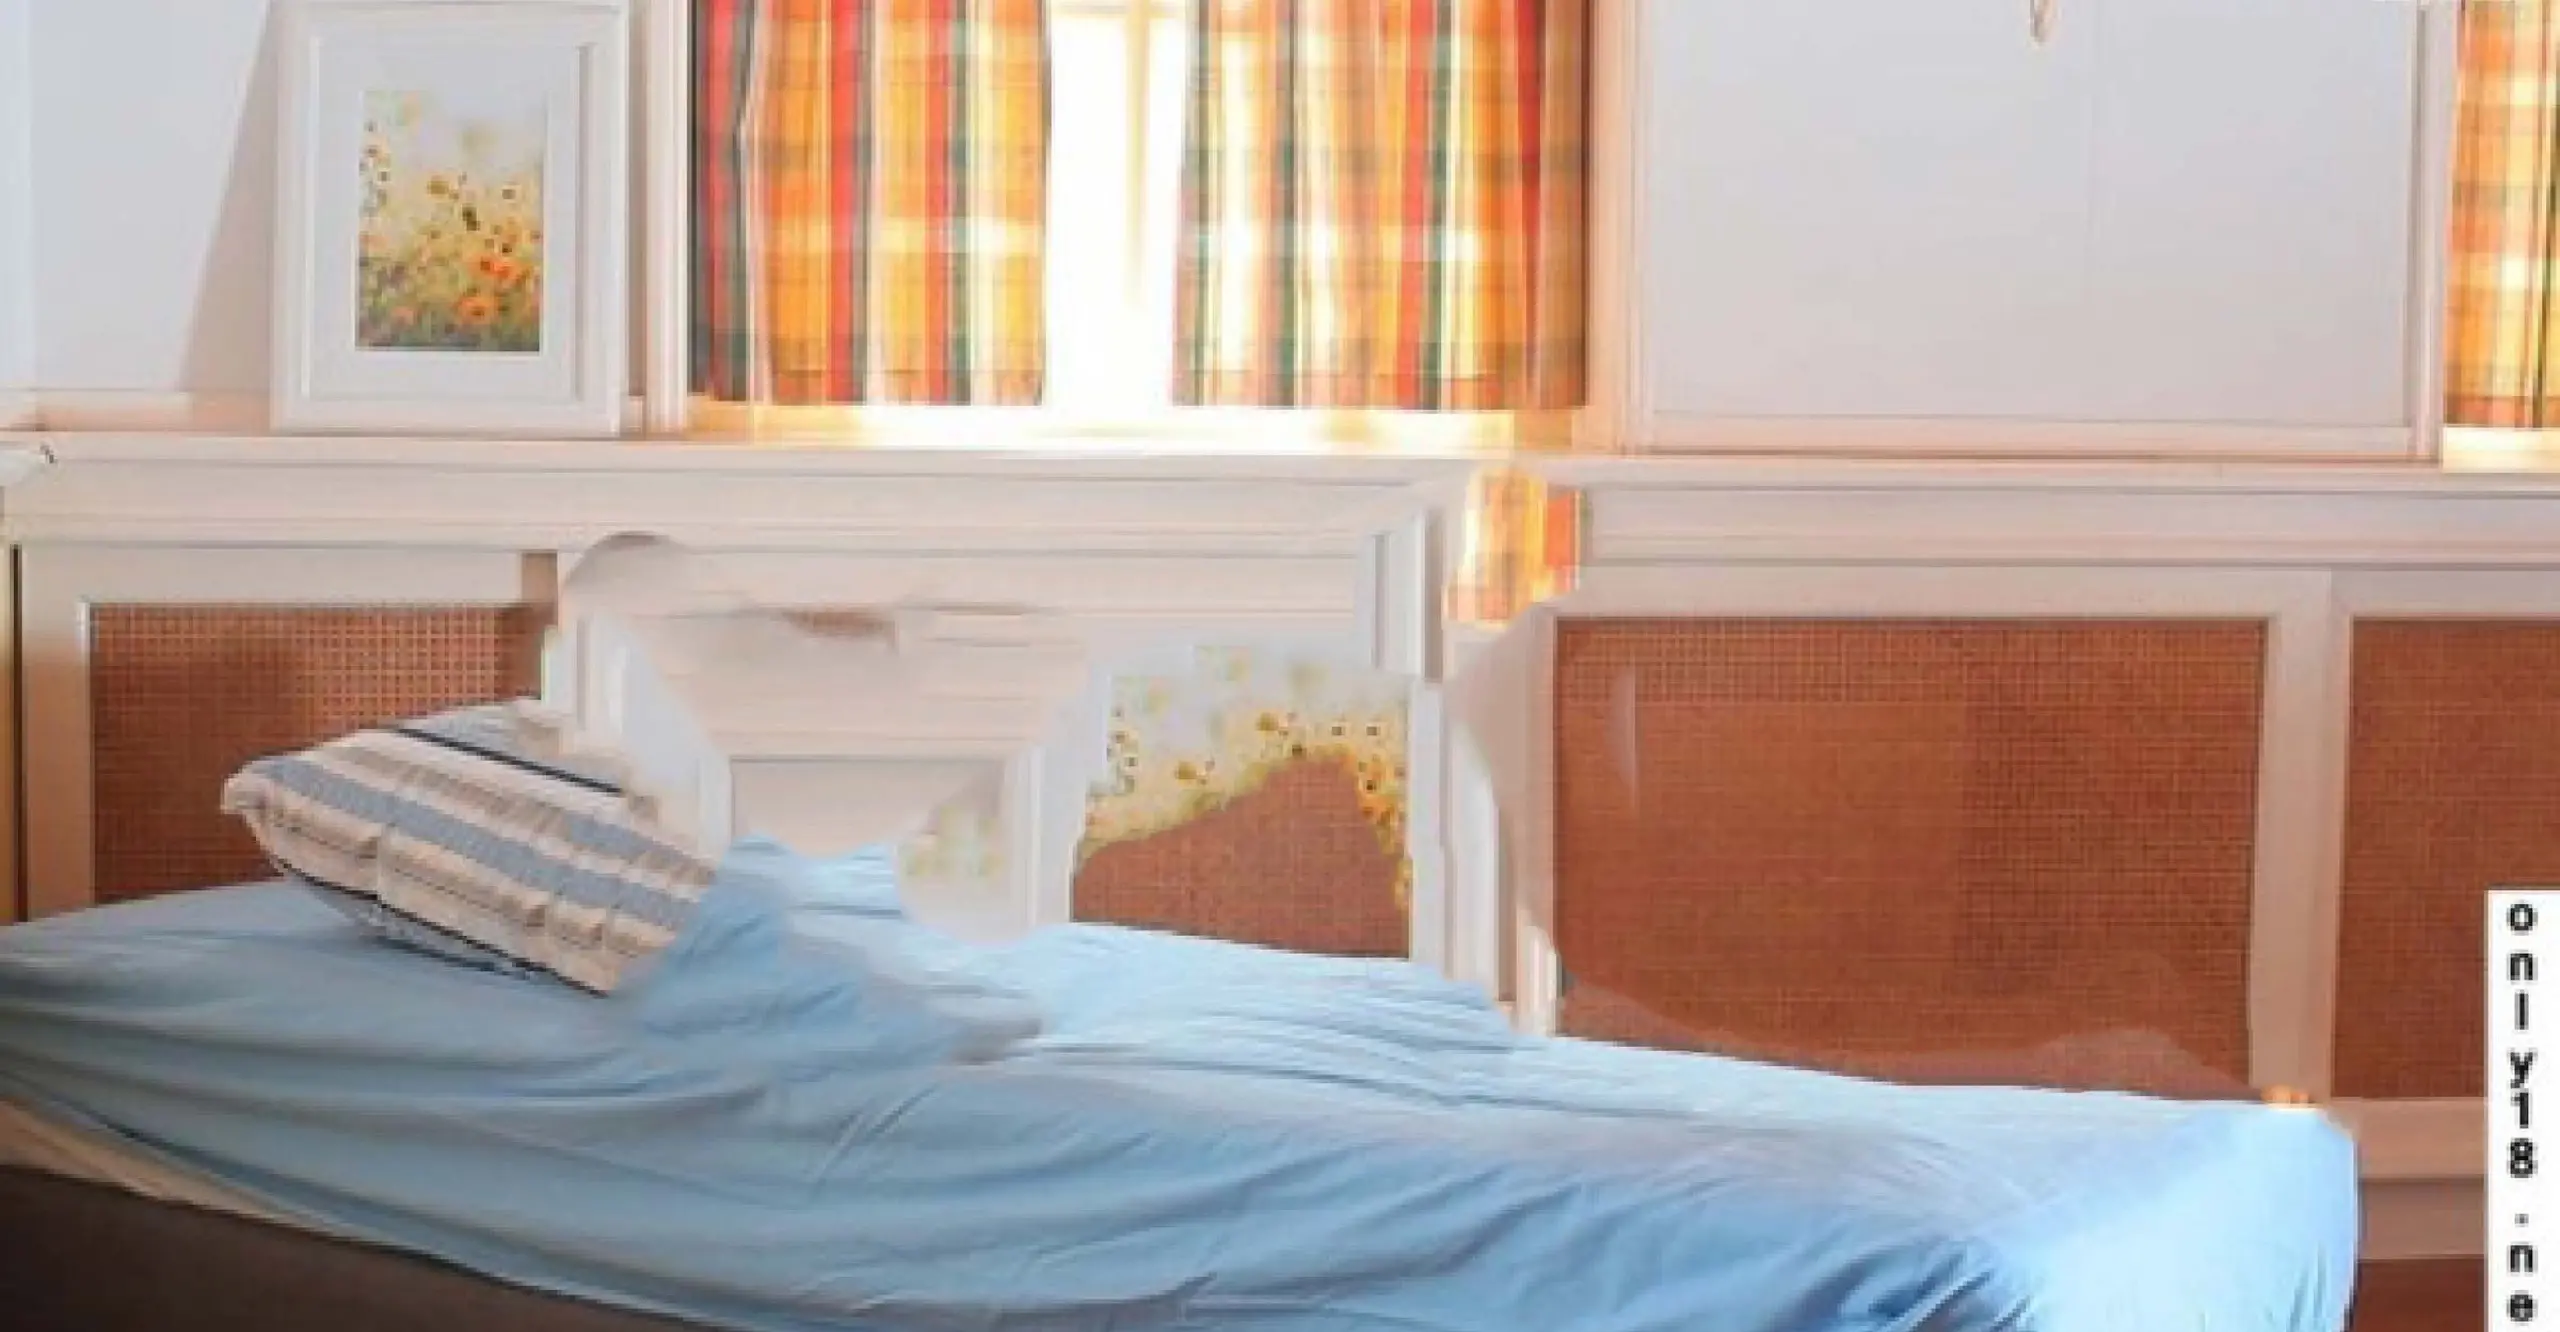 An image of a room with white walls, orange curtains, a bed with blue sheets and a person digitally removed 